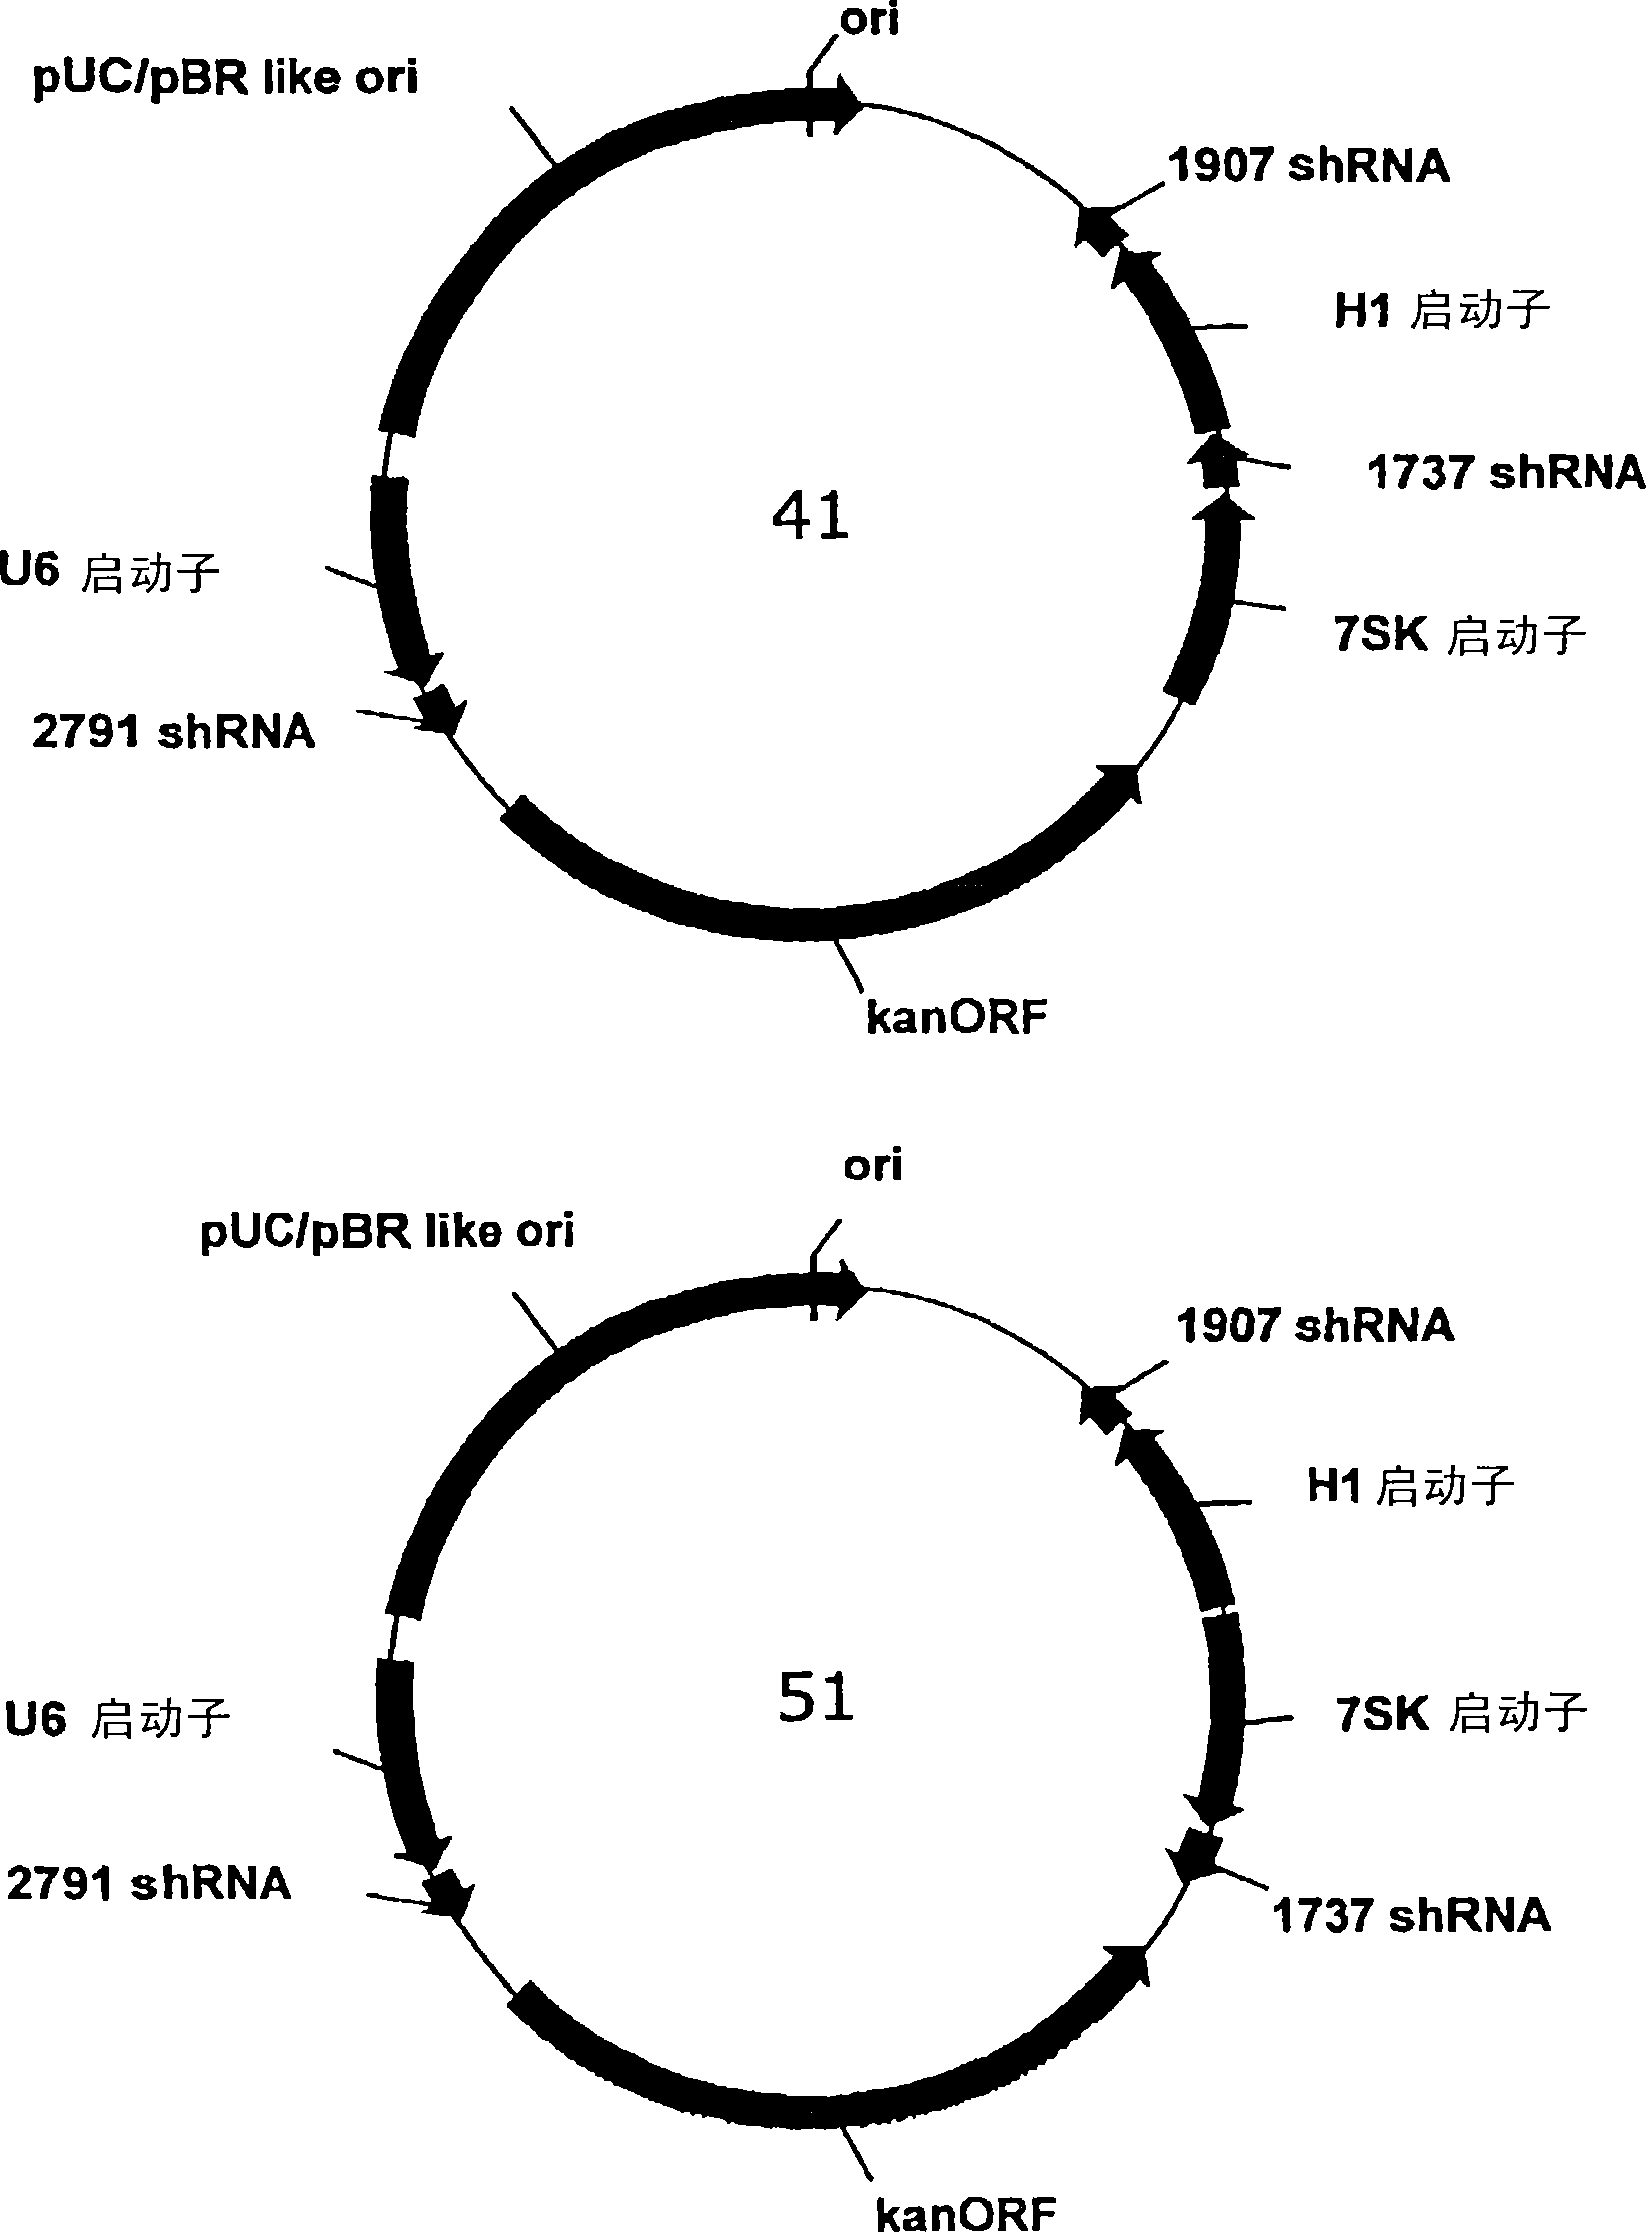 Multiple RNA polymerase III promoter expression constructs